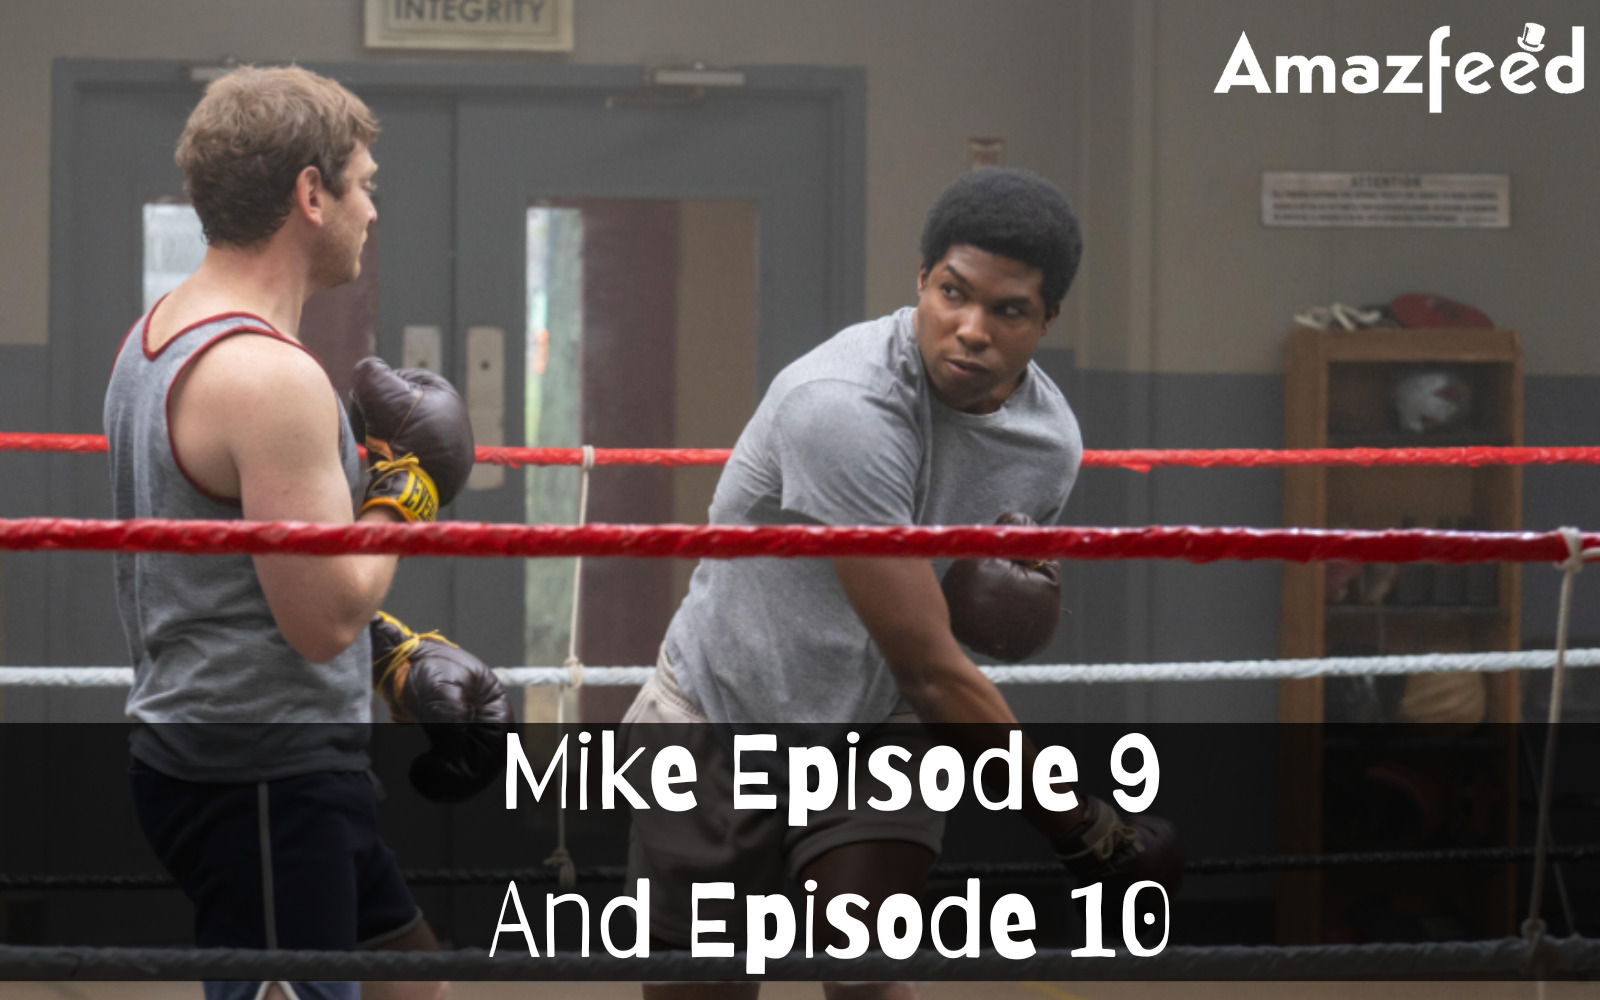 Mike Episode 9 countdown